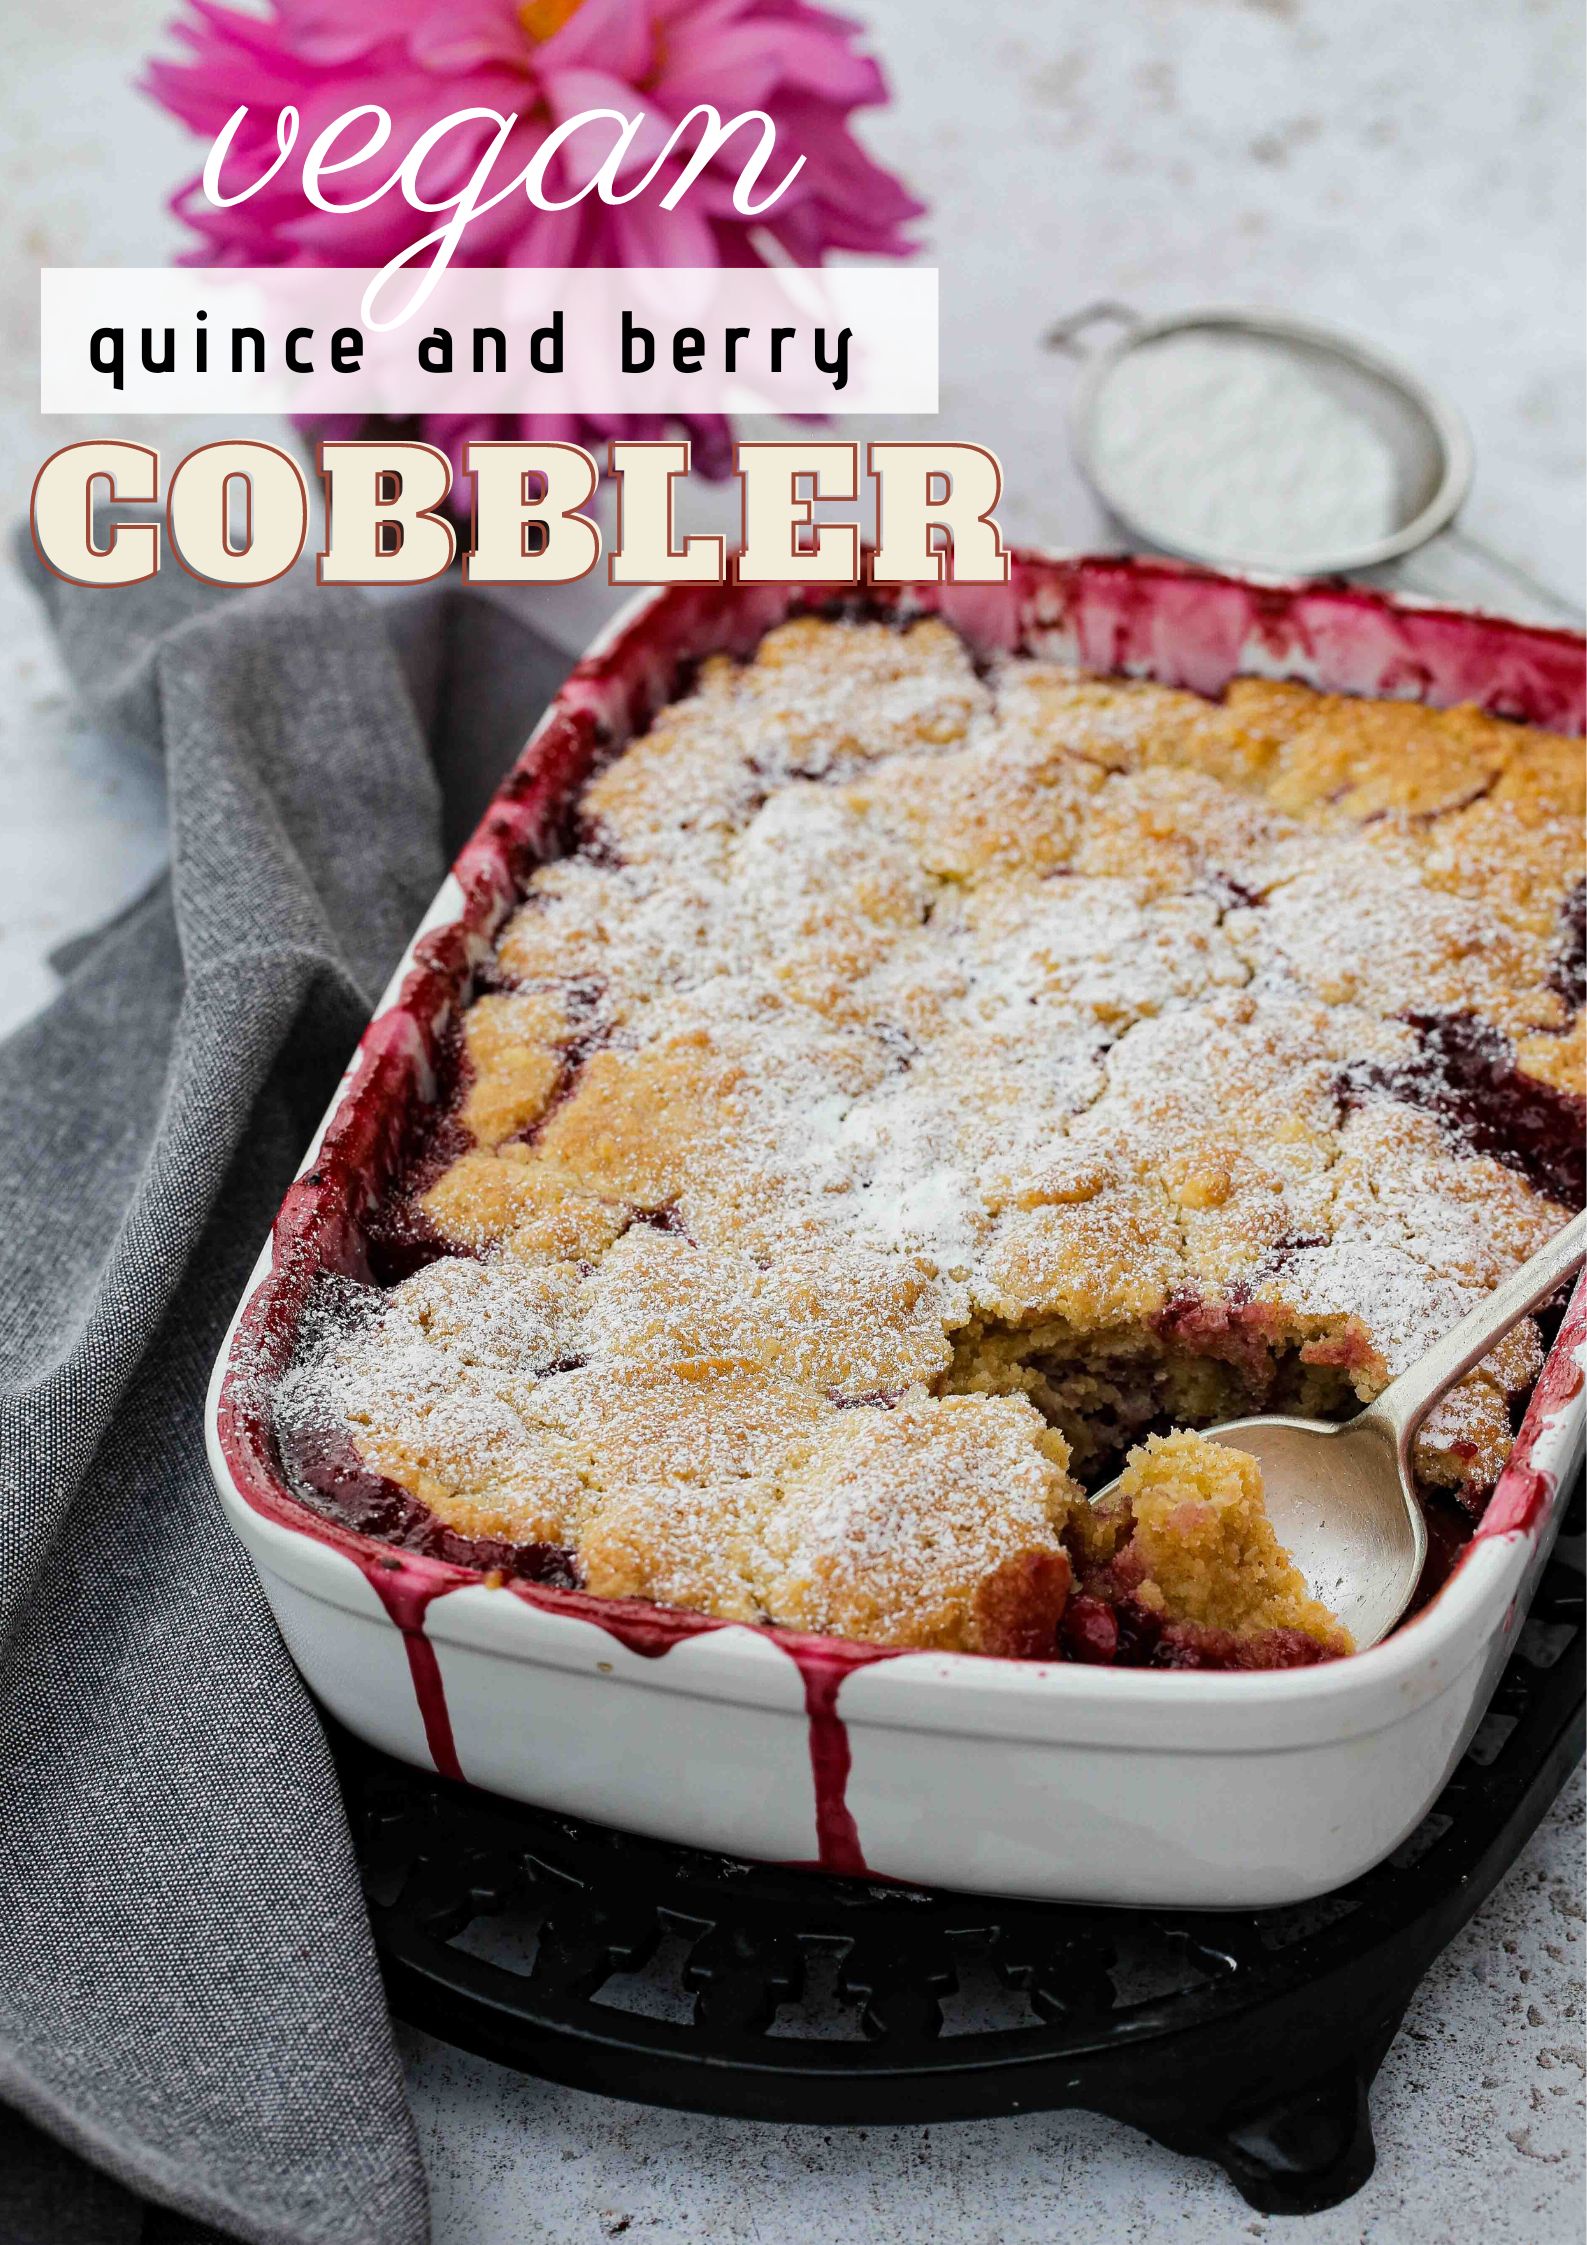 Ripe quince and juicy berries cooked in a sticky sweet syrup then topped with a rich, buttery and crisp cobbler. Perfect for using up any frozen summer berries. Just add vanilla ice cream for the perfect autumn dessert | Recipe on thecookandhim.com #veganbaking #vegandessert #veganrecipes #cobblerrecipe #fruitcobbler #quincerecipes